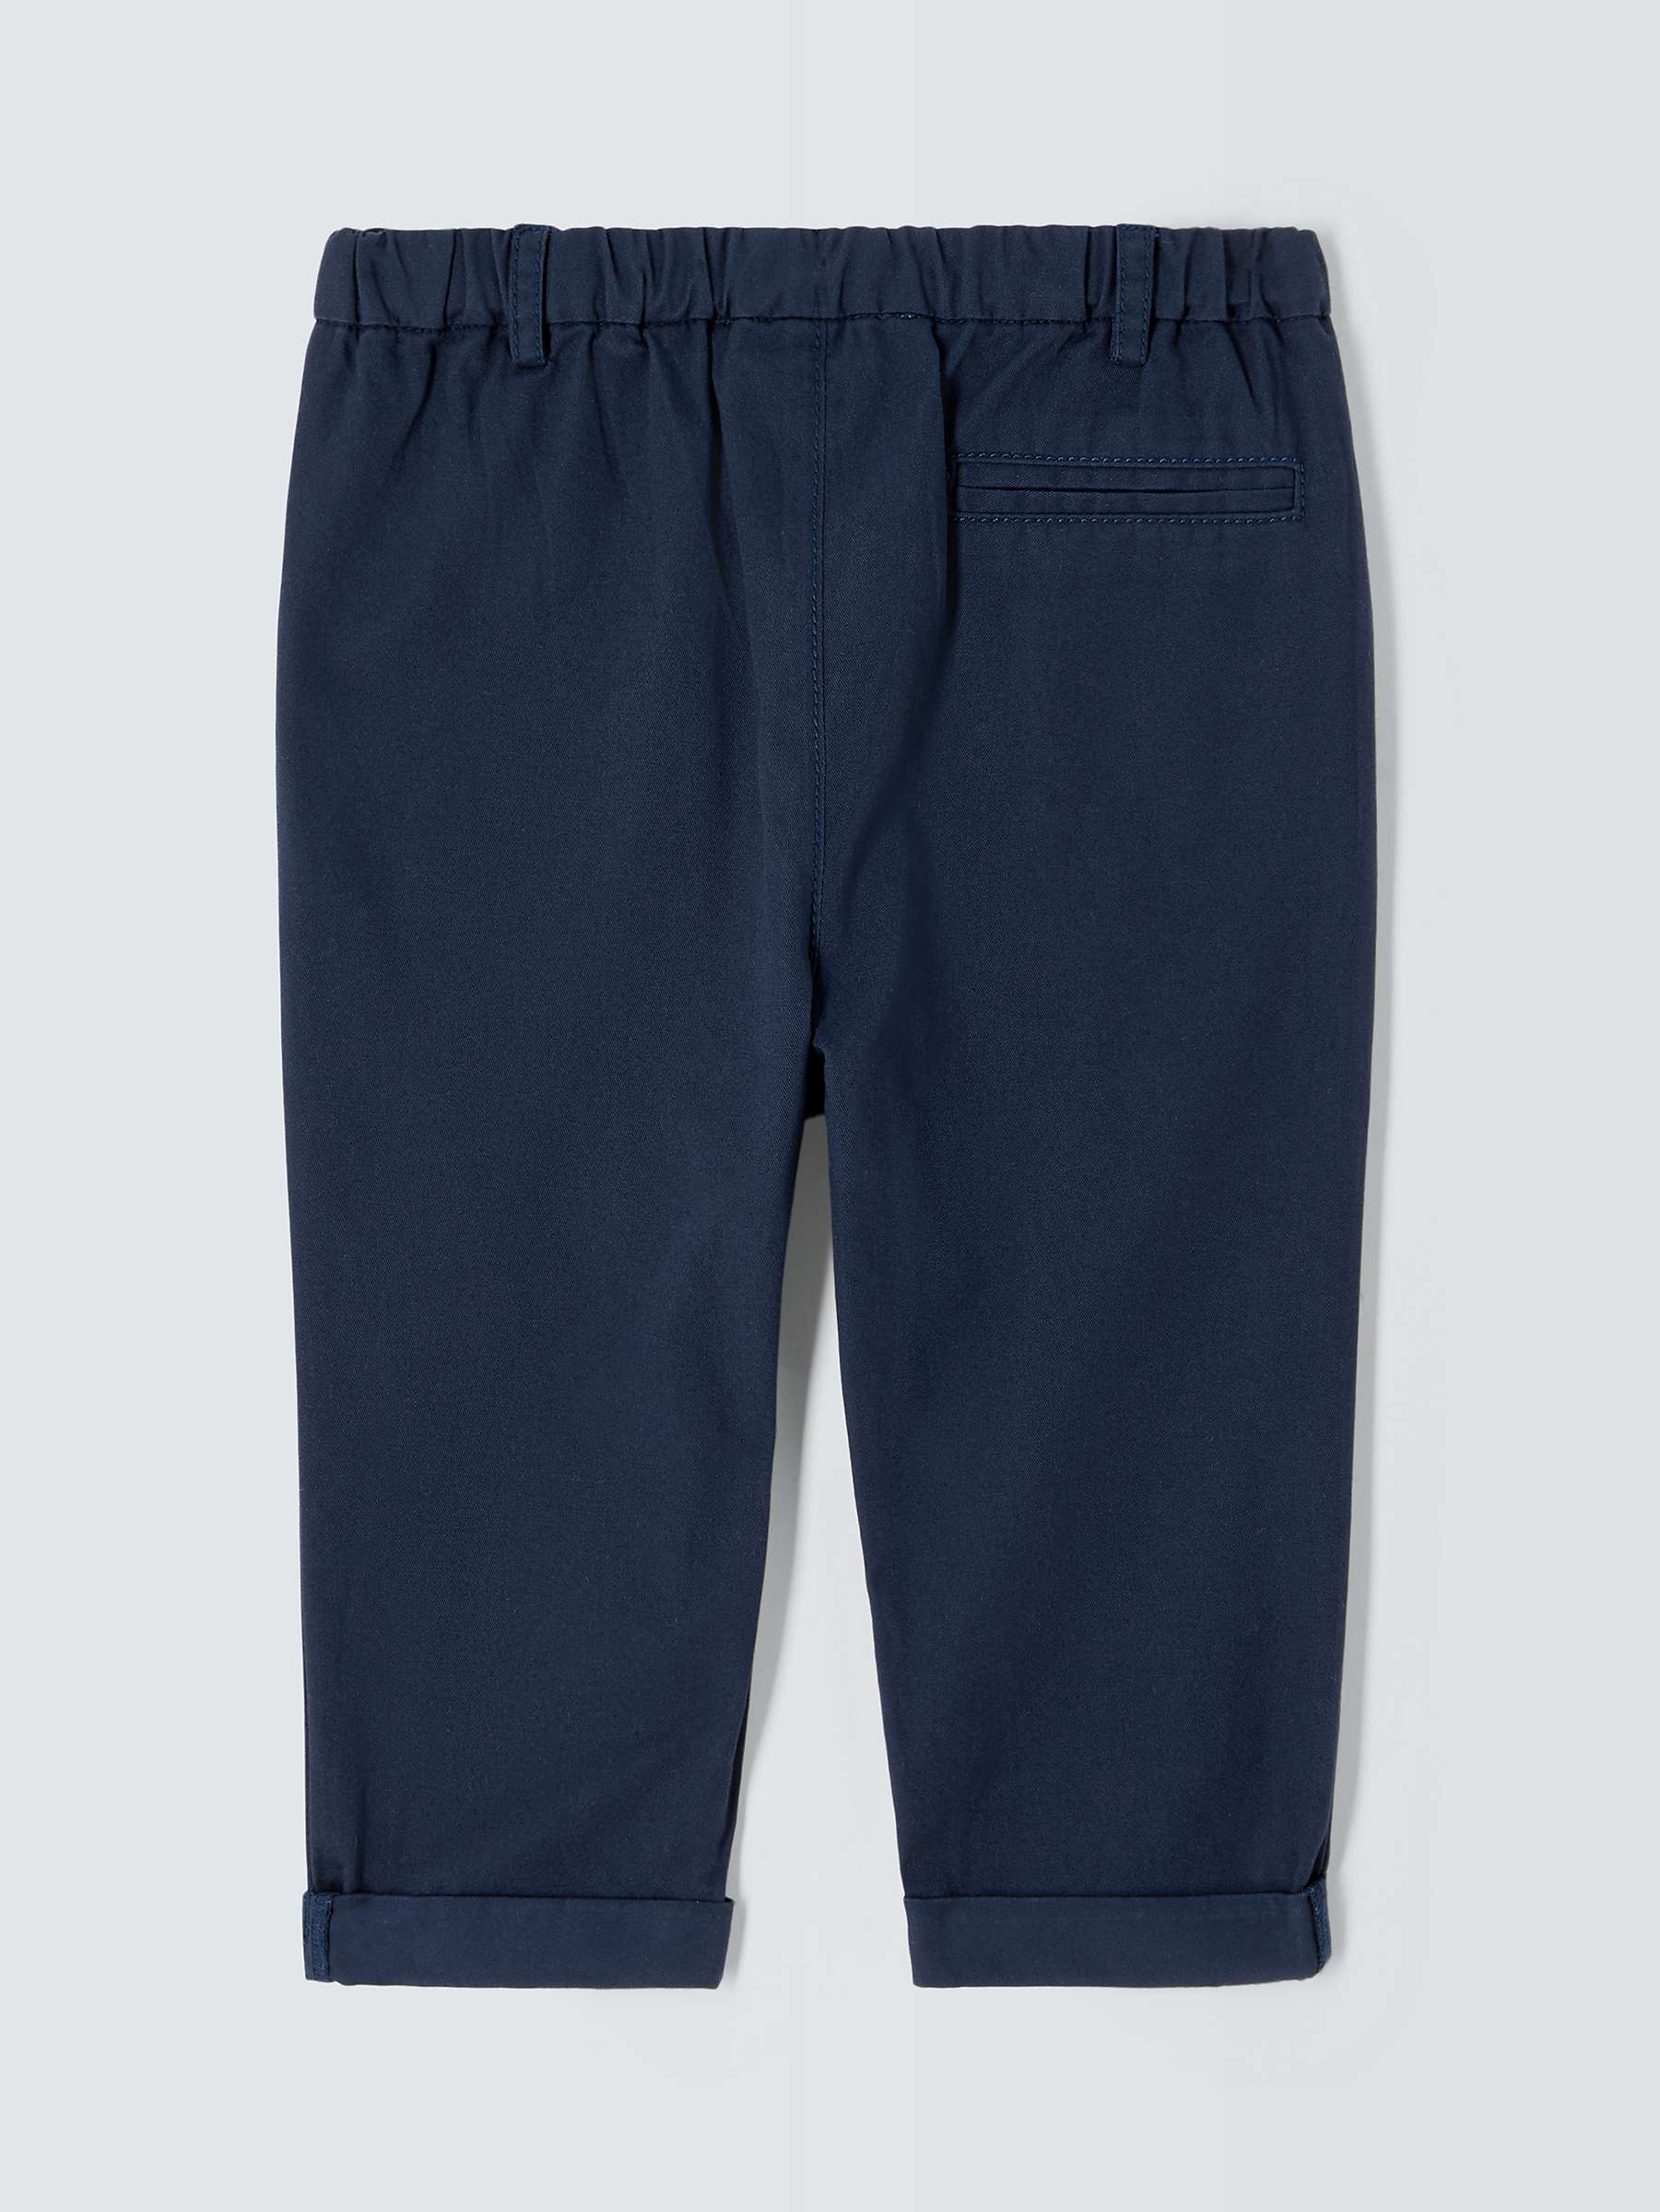 Buy John Lewis Heirloom Collection Baby Straight Leg Chinos Online at johnlewis.com